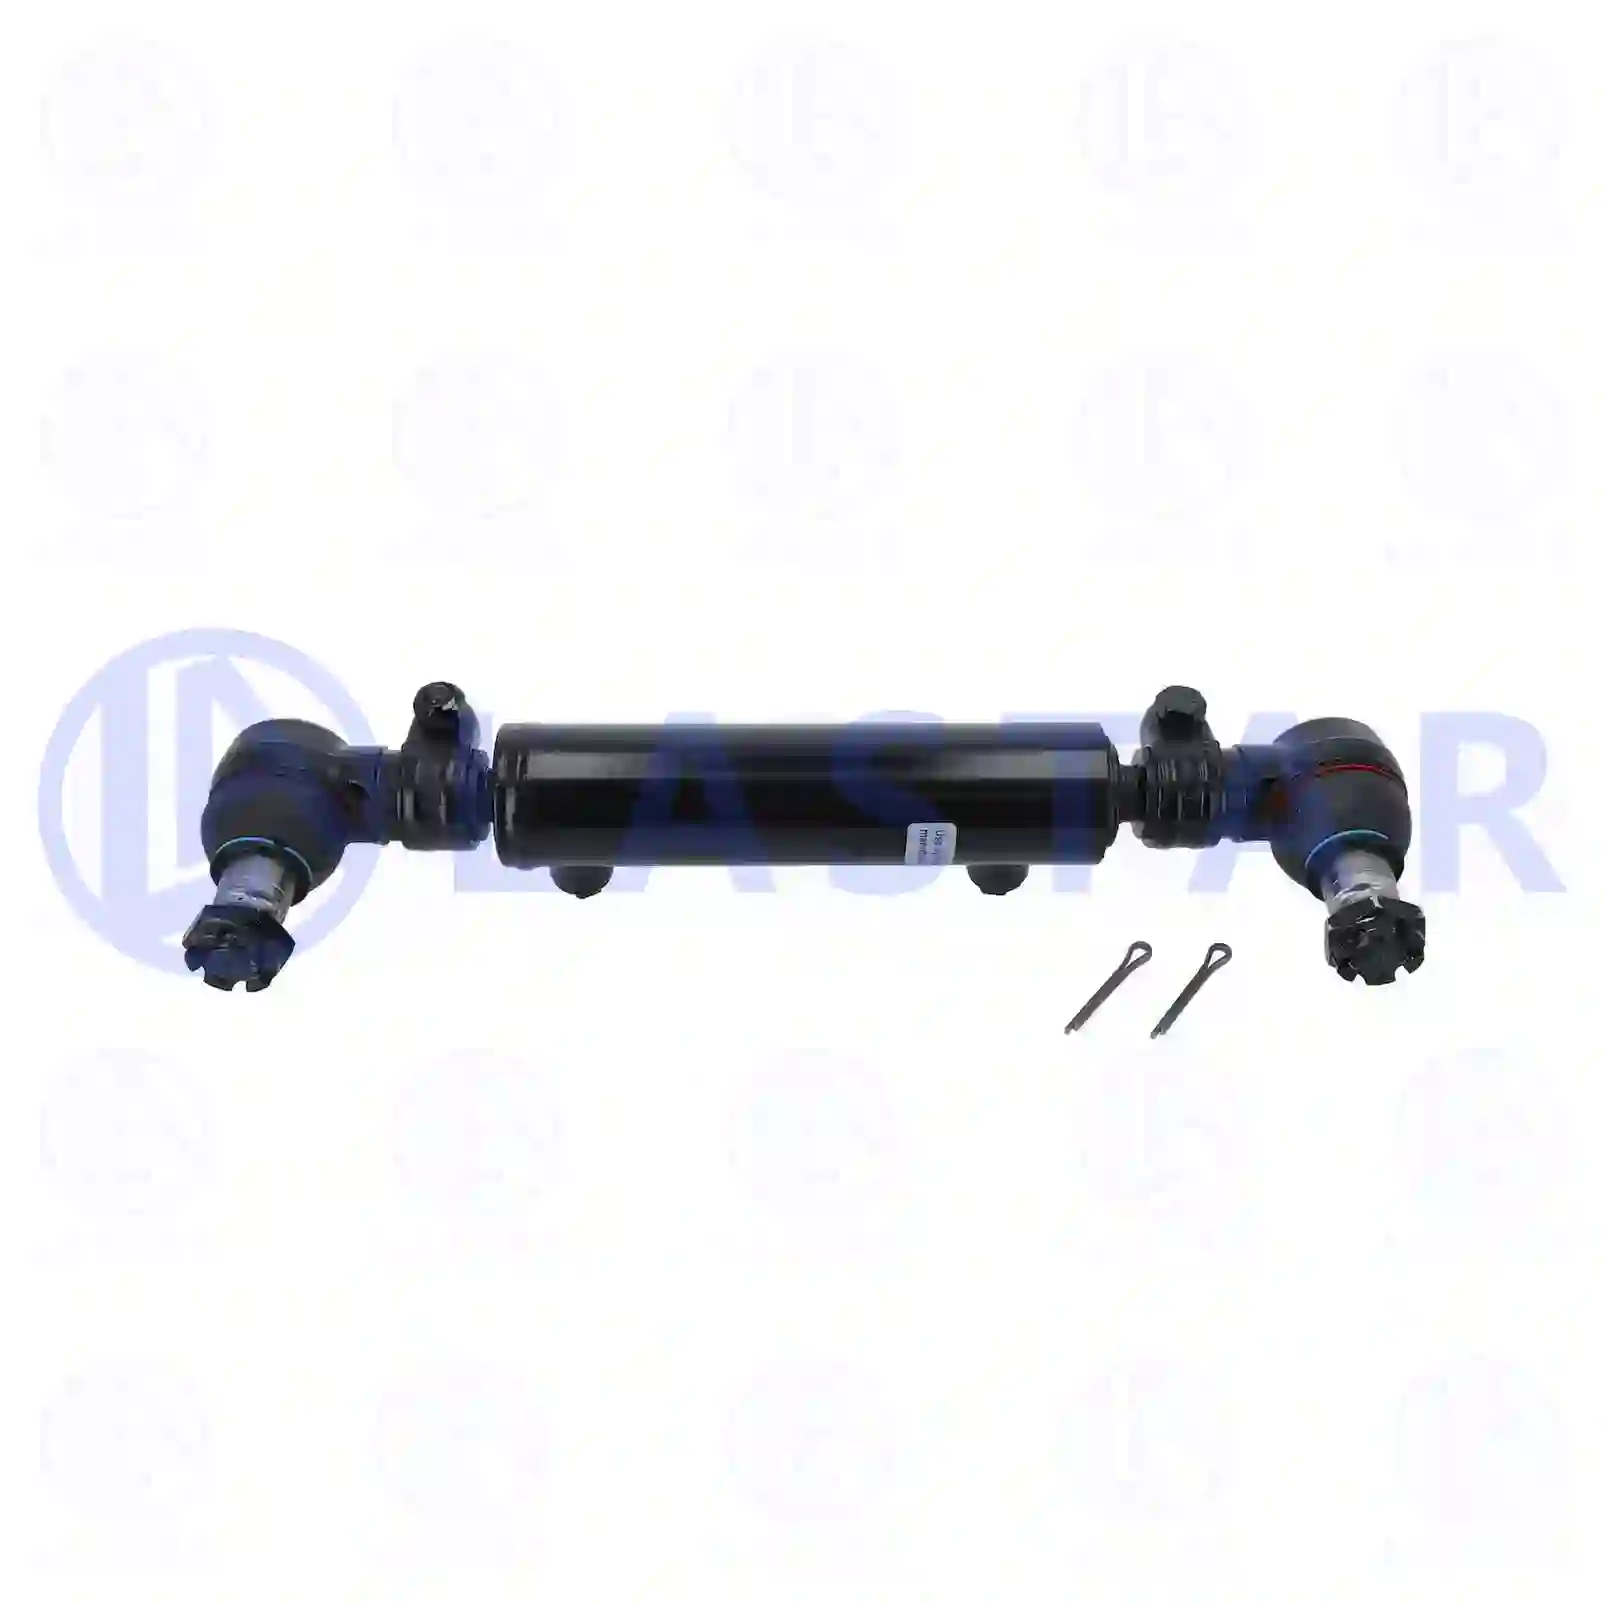  Steering cylinder || Lastar Spare Part | Truck Spare Parts, Auotomotive Spare Parts